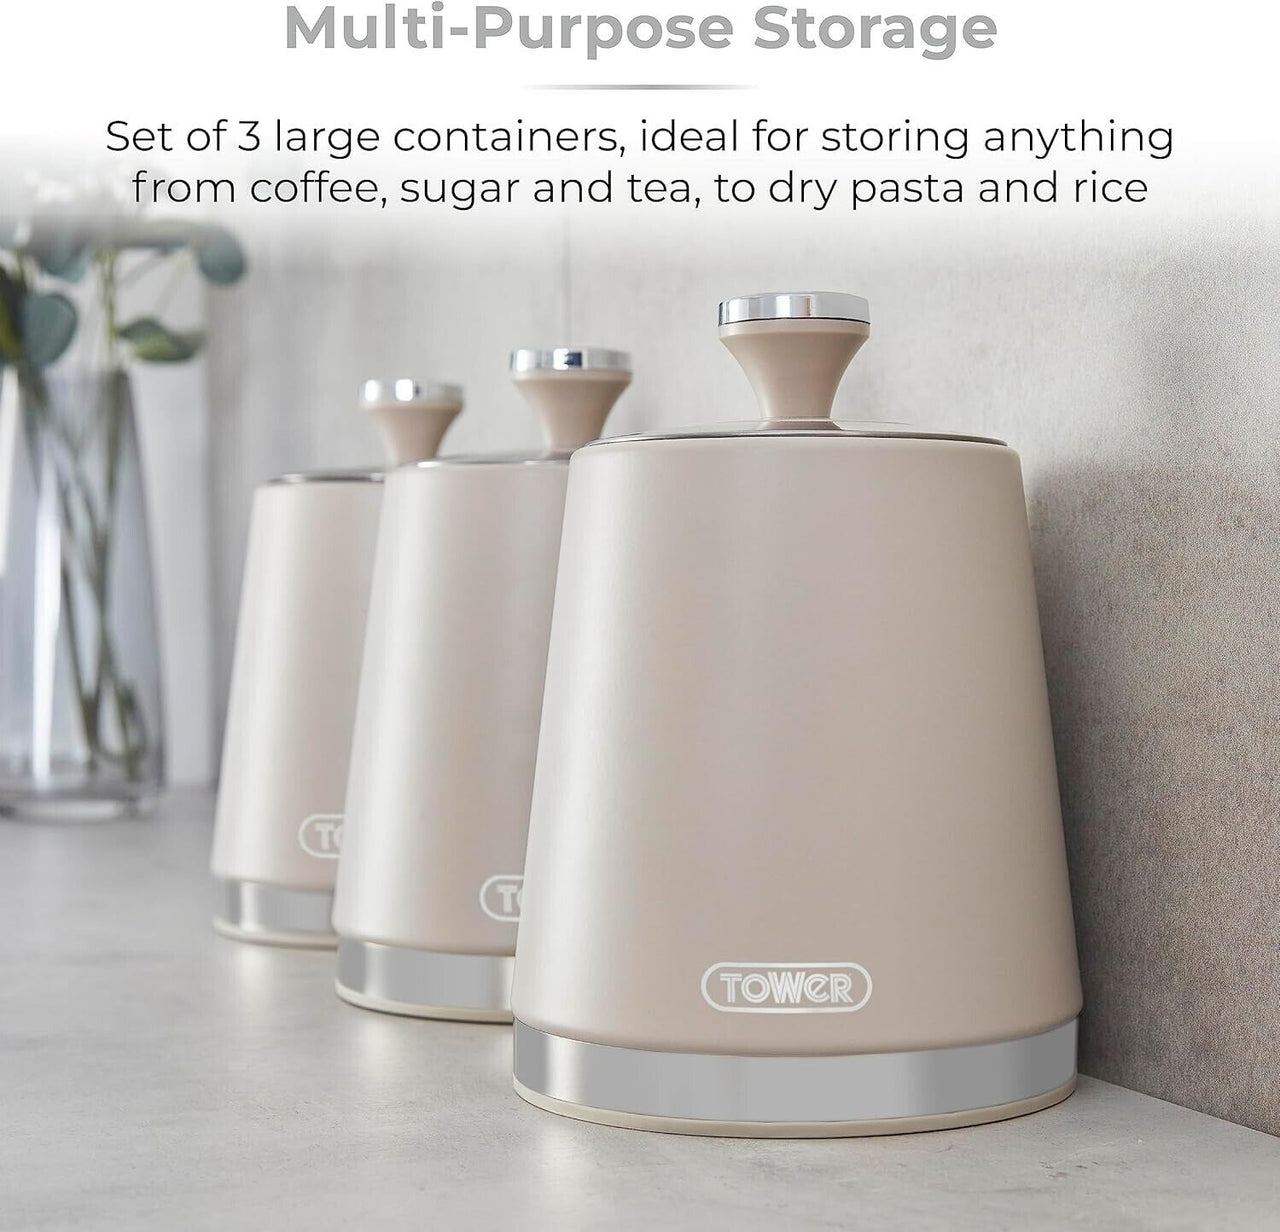 Tower Cavaletto Tea, Coffee & Sugar Storage Canisters in Latte & Chrome Accents